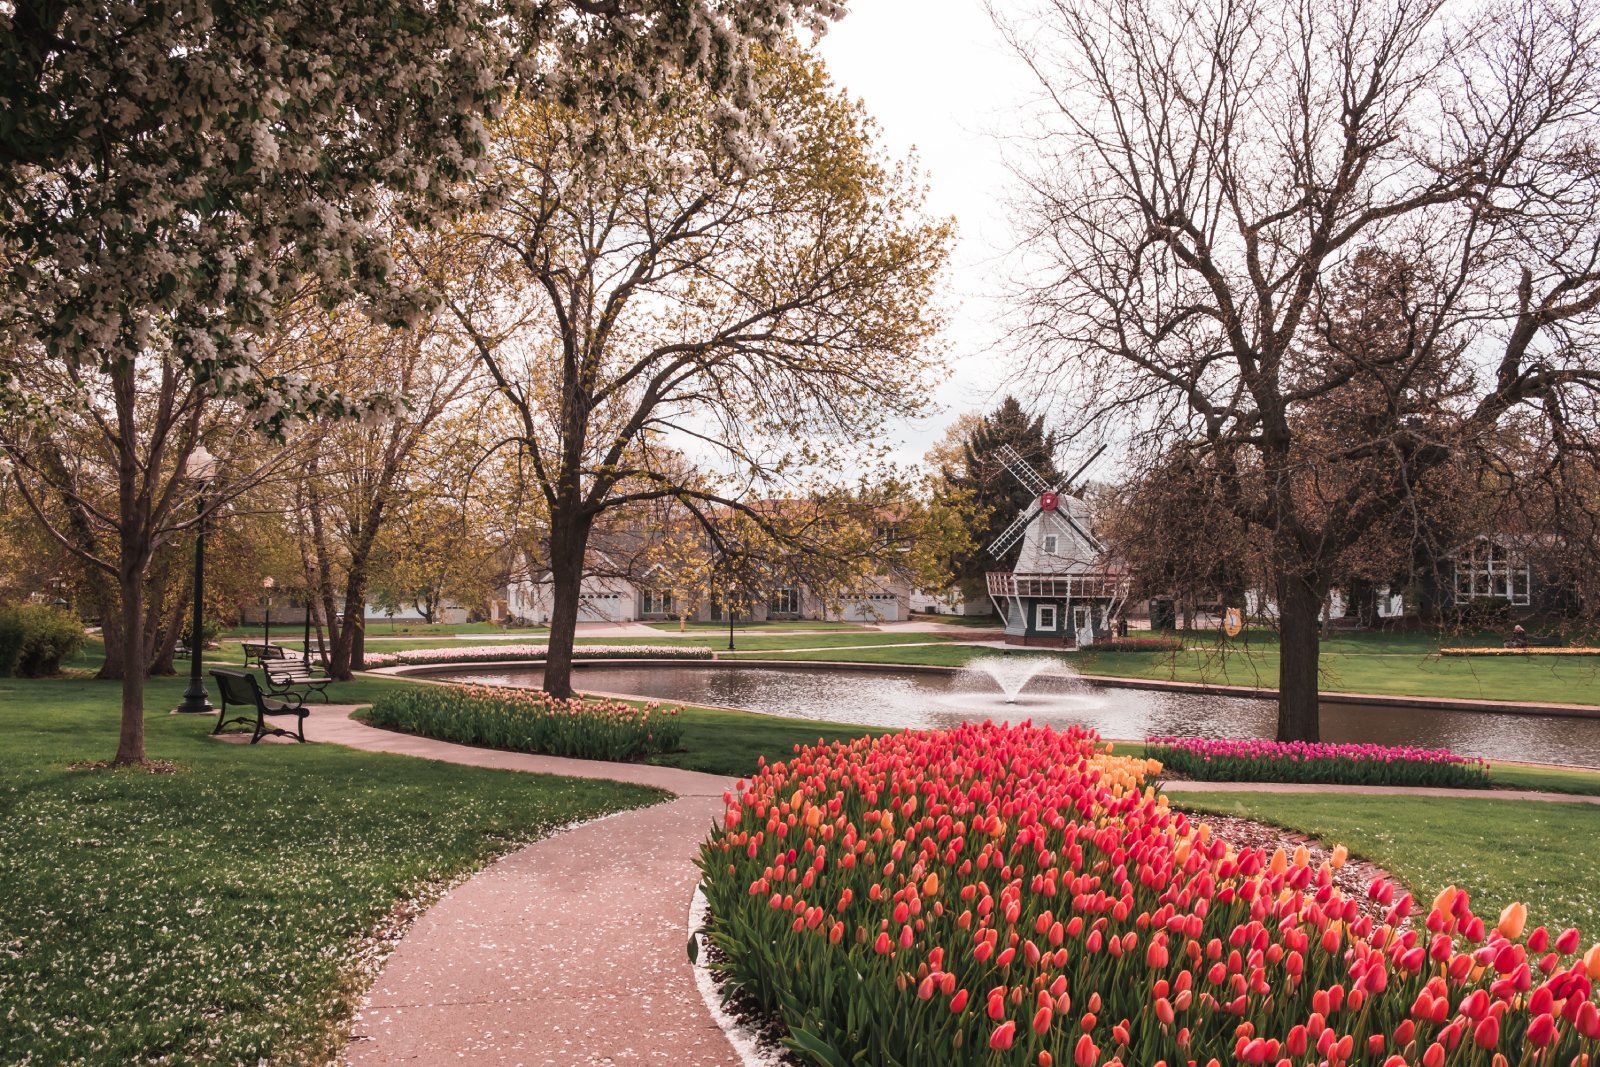 Image Credit: Shutterstock / Bella Bender <p>Pella’s Dutch heritage shines through its architecture, tulip festivals, and unique windmills. A trip here offers a European vibe without the costly flight overseas. It’s a cultural escape in the heart of the Midwest.</p>